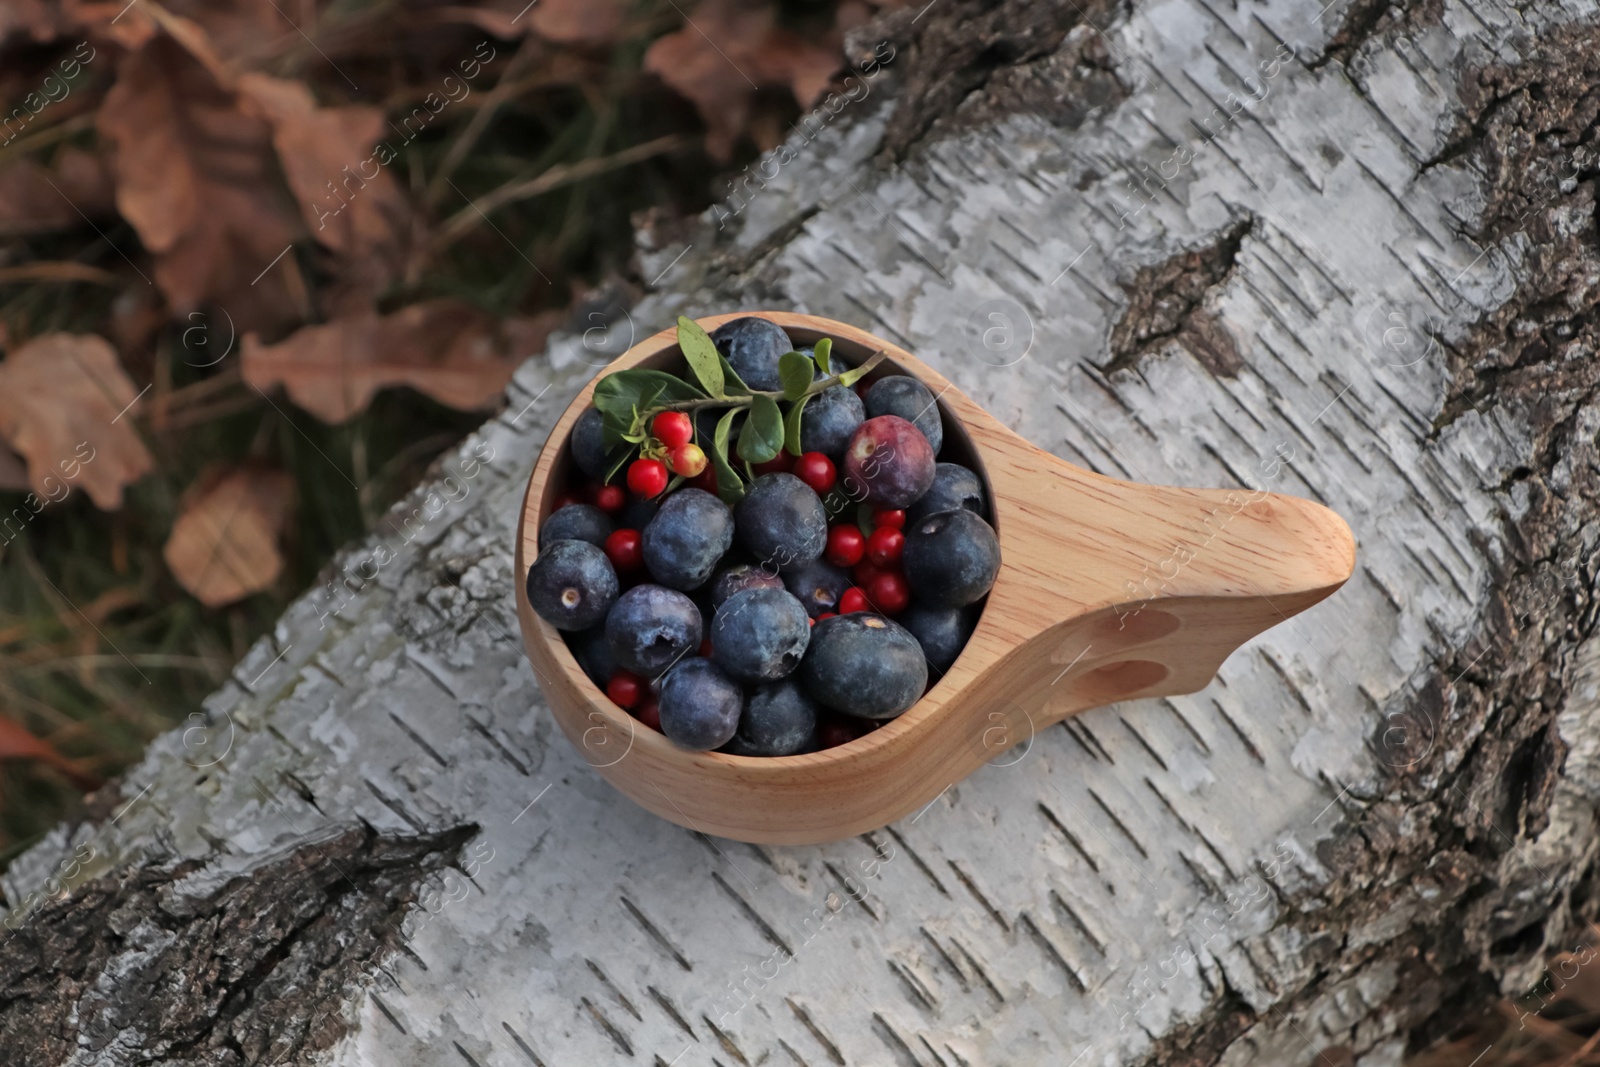 Photo of Wooden mug full of fresh ripe blueberries and lingonberries on log in forest, above view